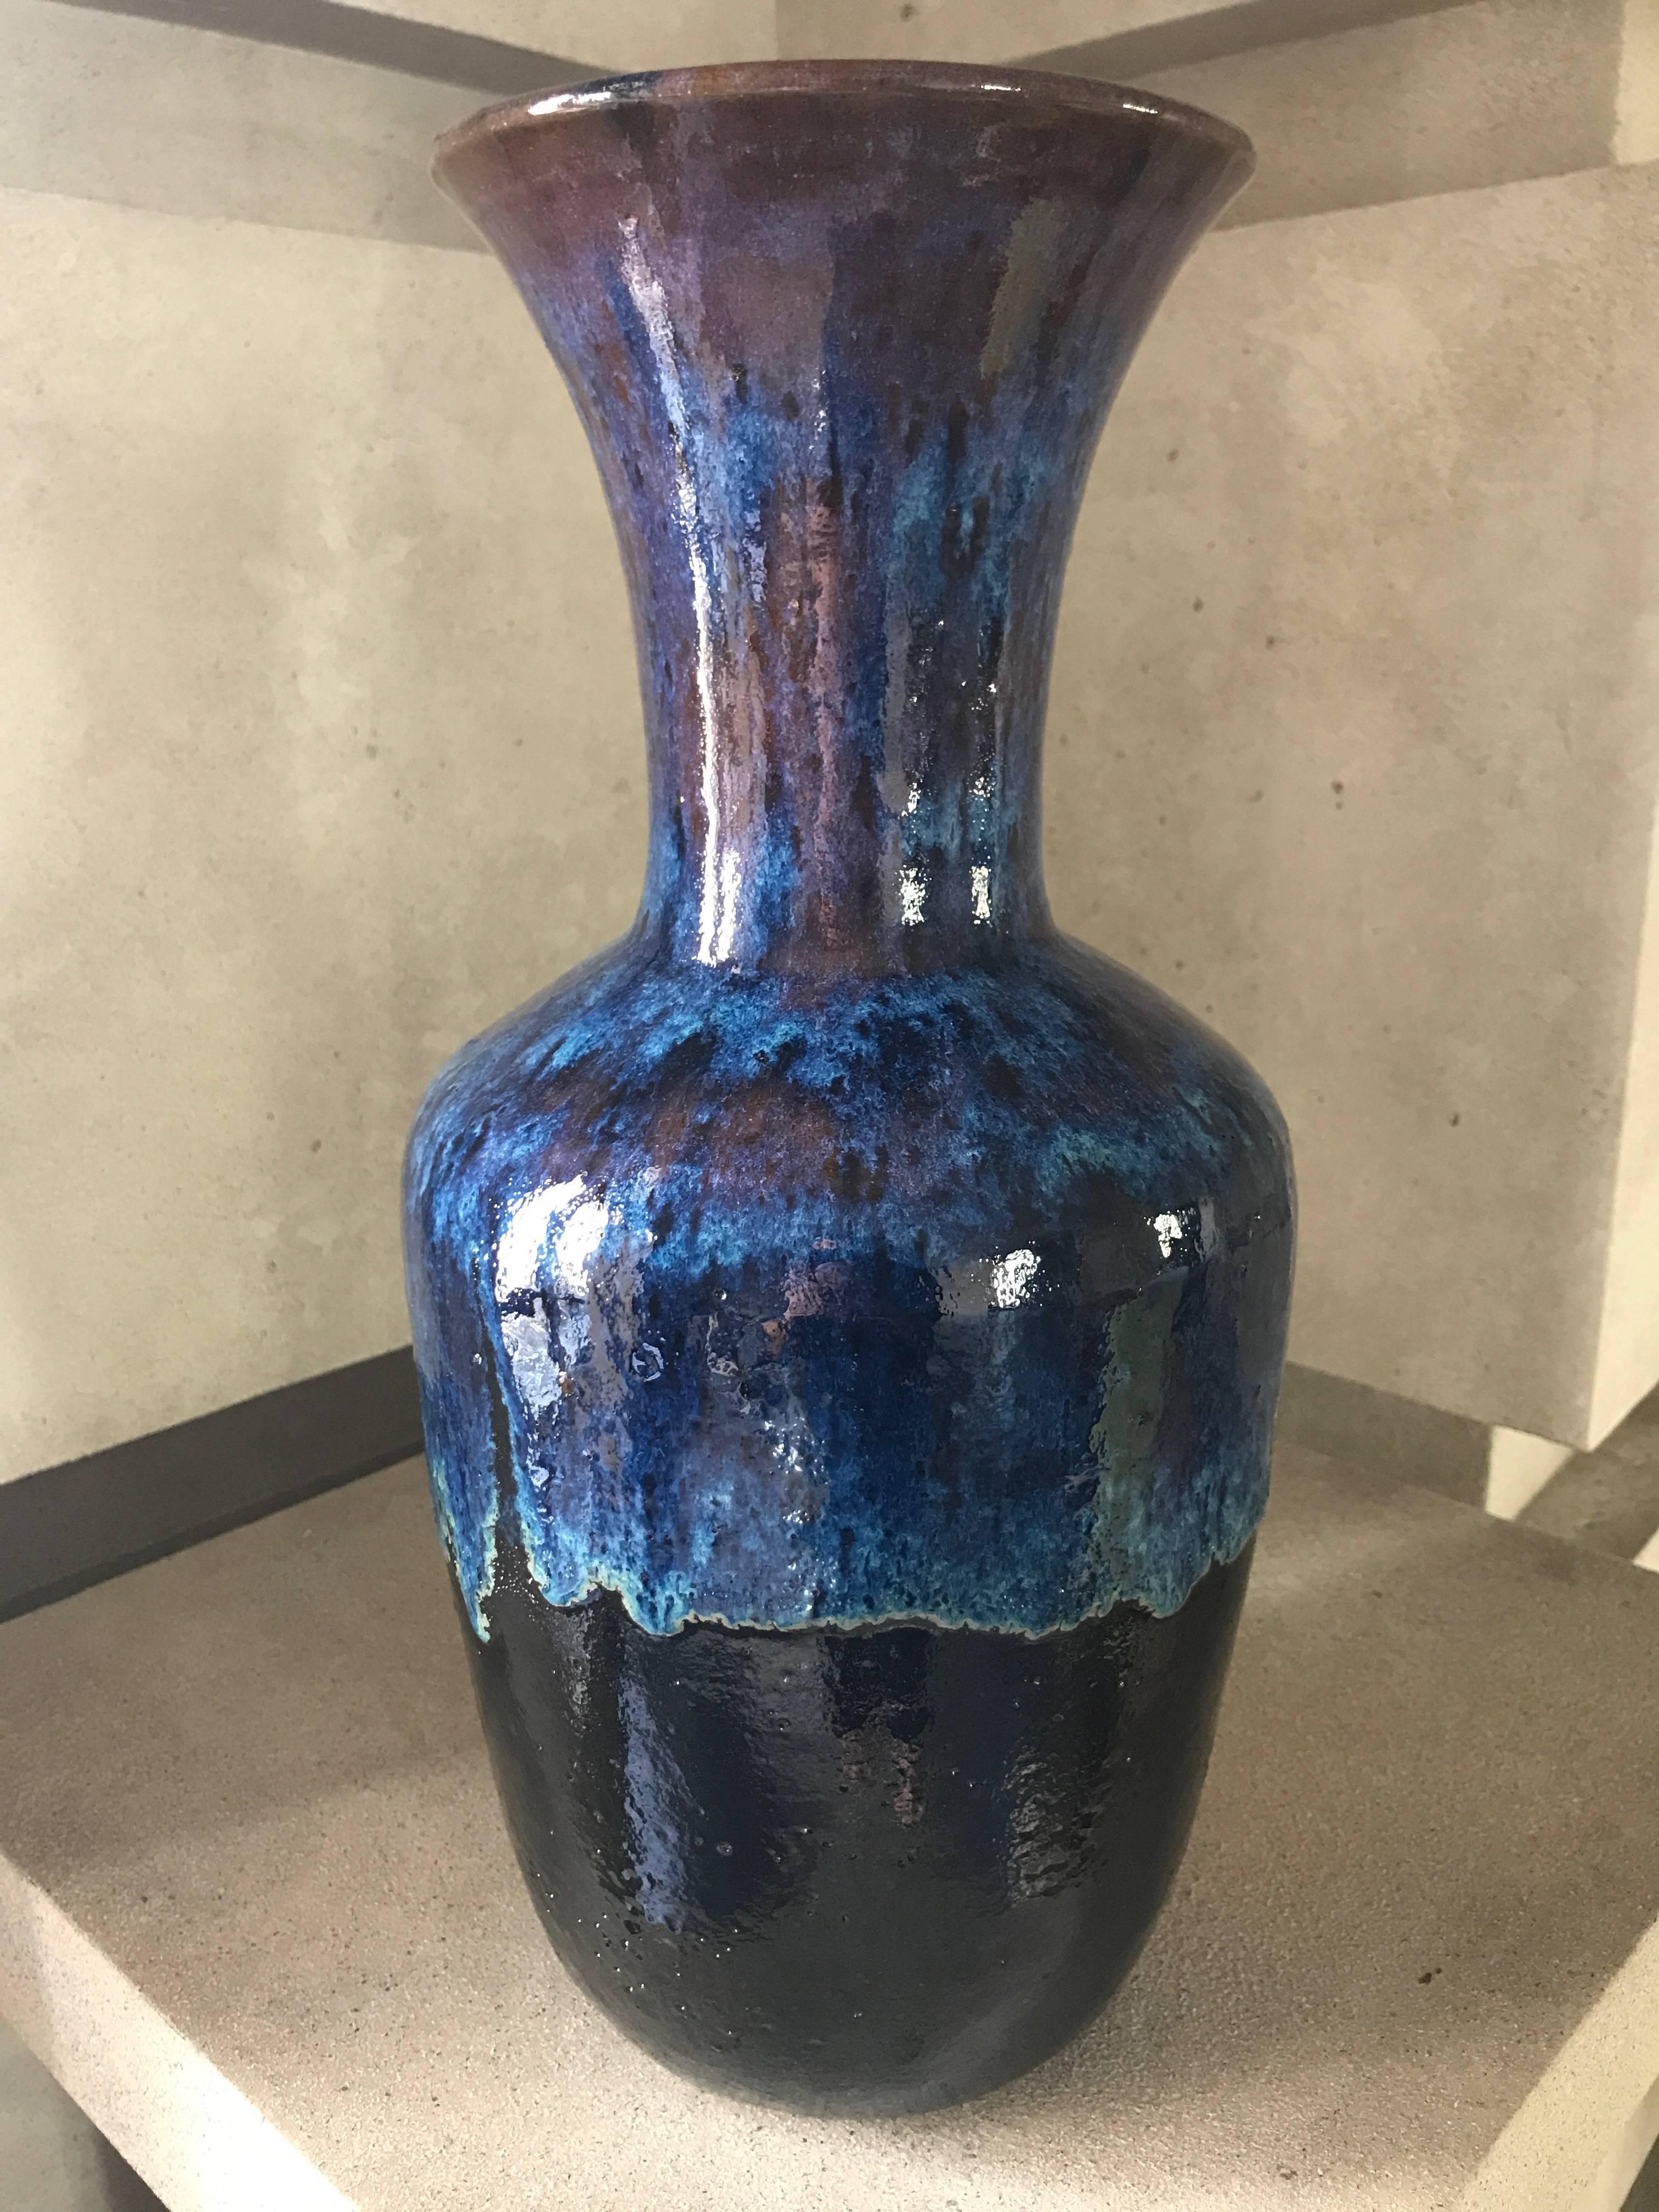 A handmade ceramic vase, classically inspired shape, in a dramatic cordovan, cobalt blue, and black custom glaze.
This stunning vase is suitable to be wired to become a lamp.
This contemporary vase has been custom designed and makes a sensational